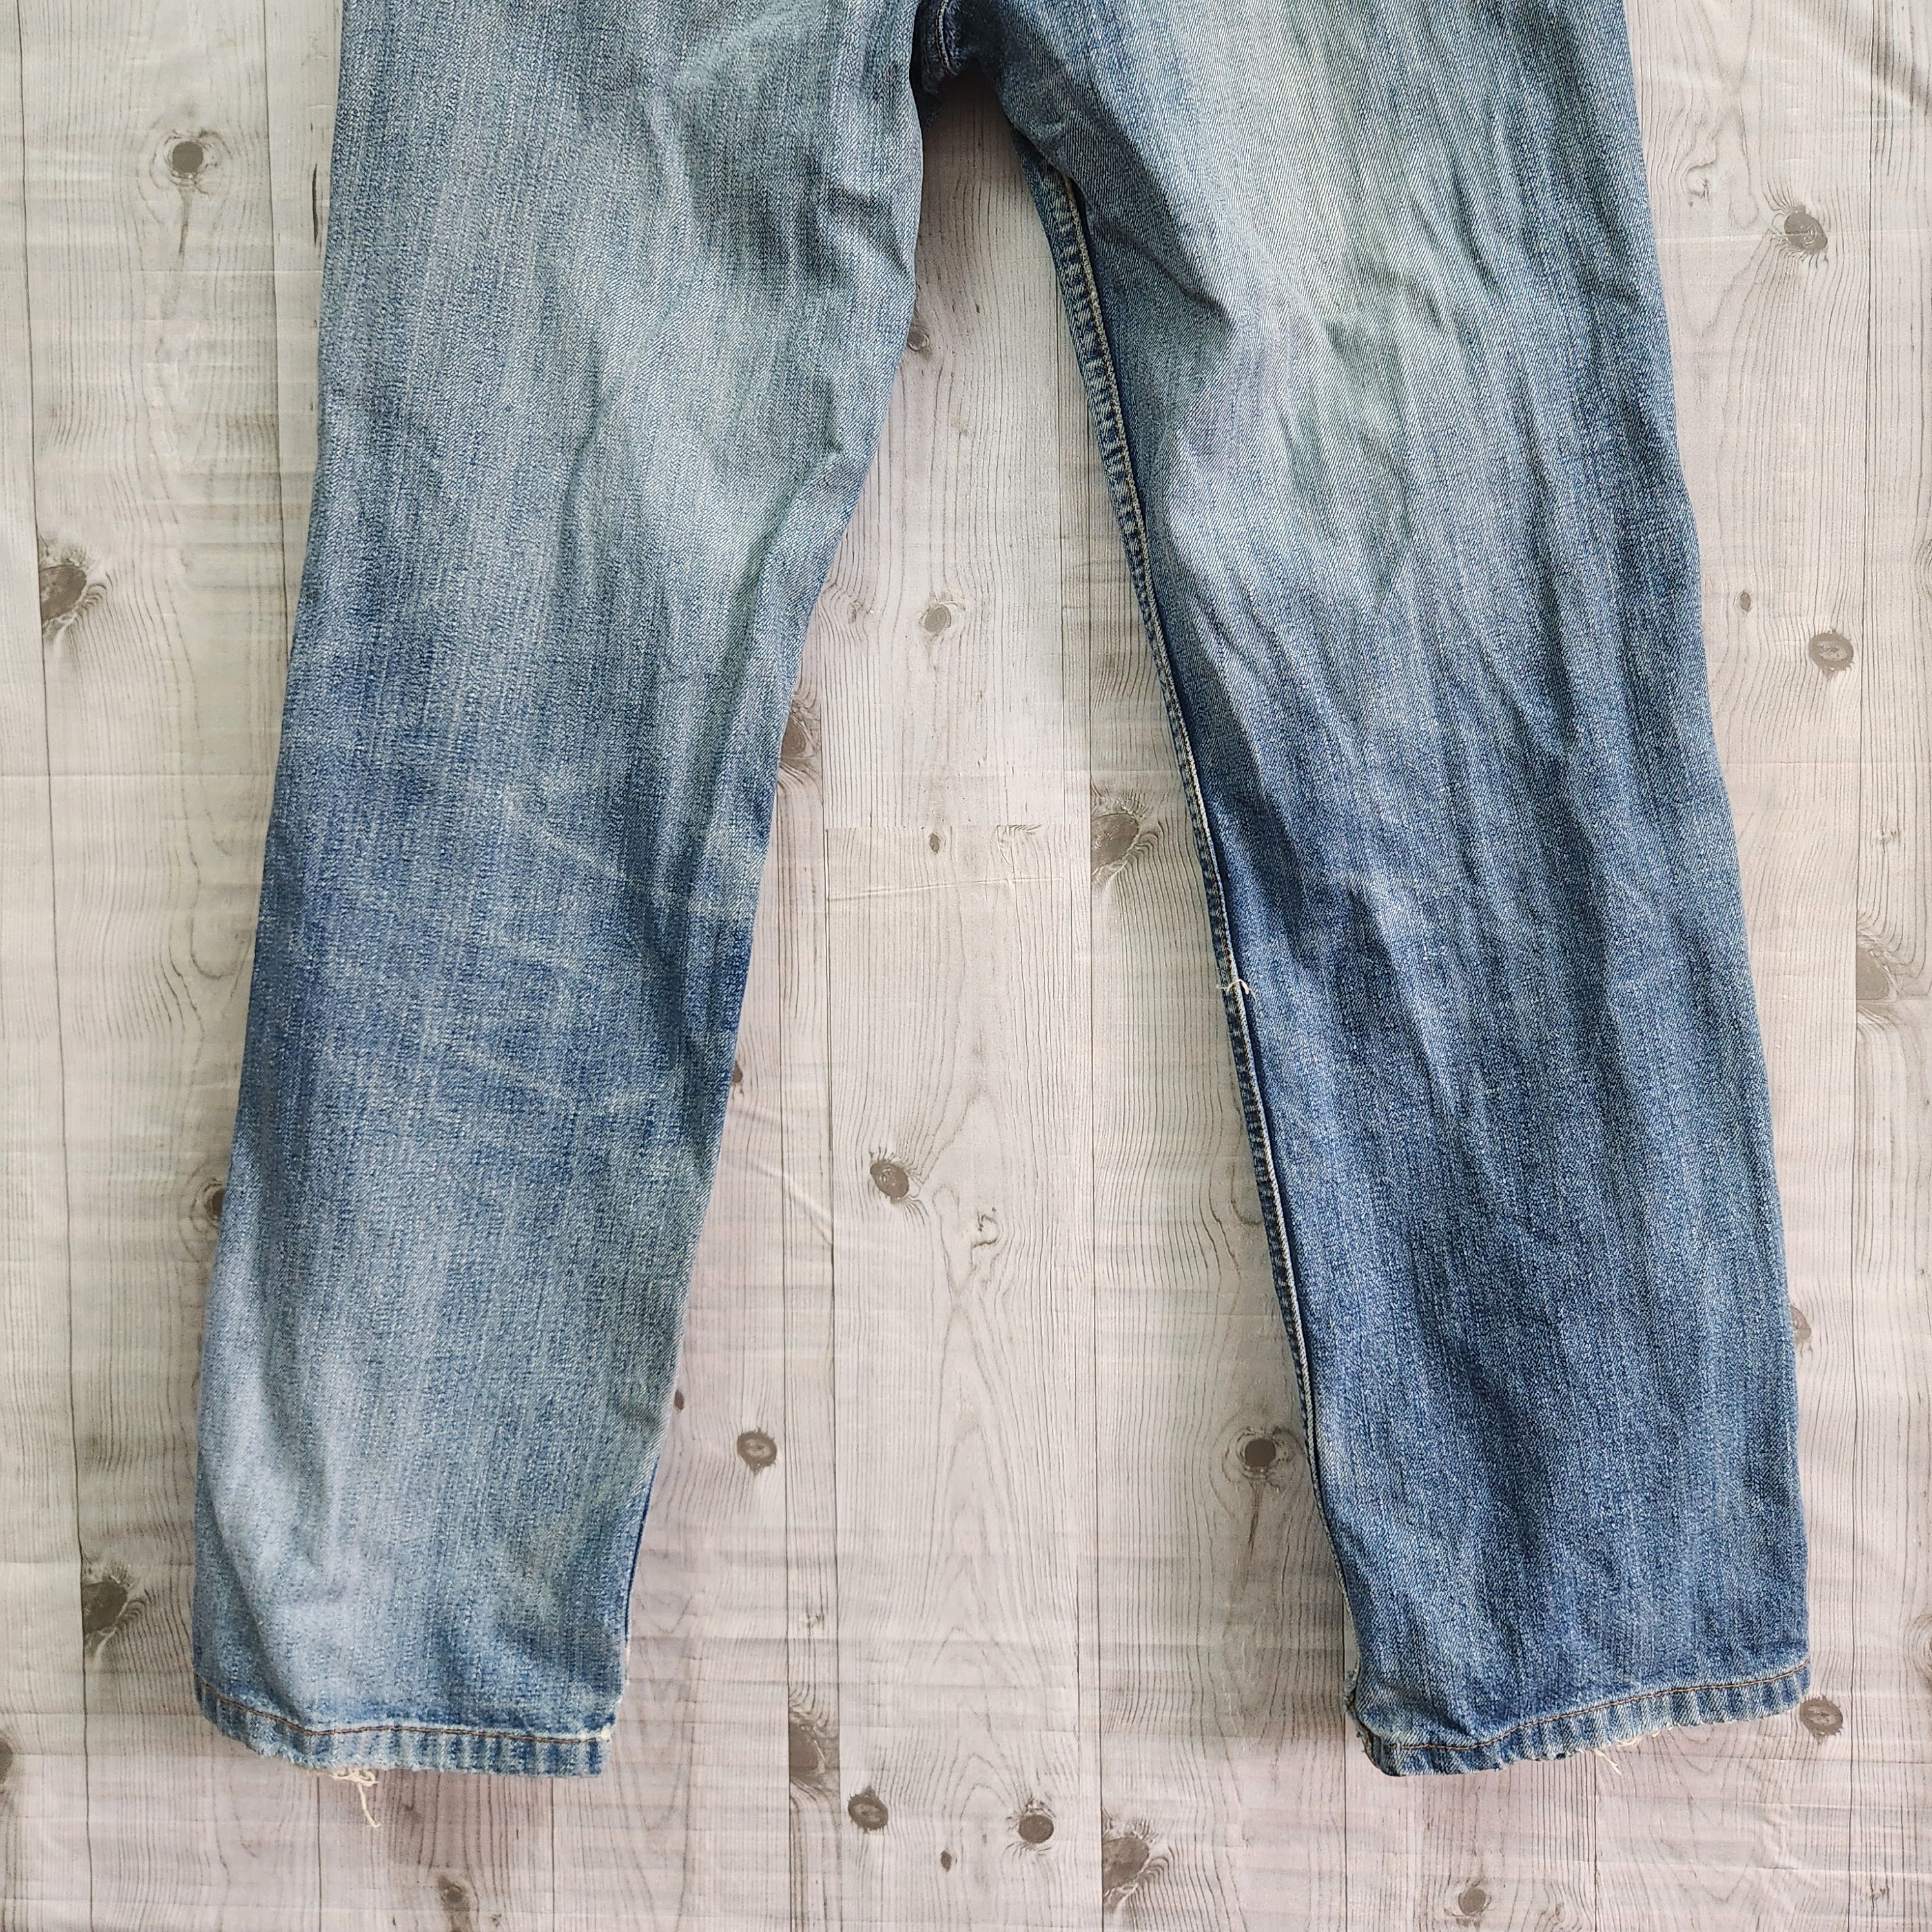 Levis 502 Vintage Distressed Ripped Denim Jeans Year 2002 - 15